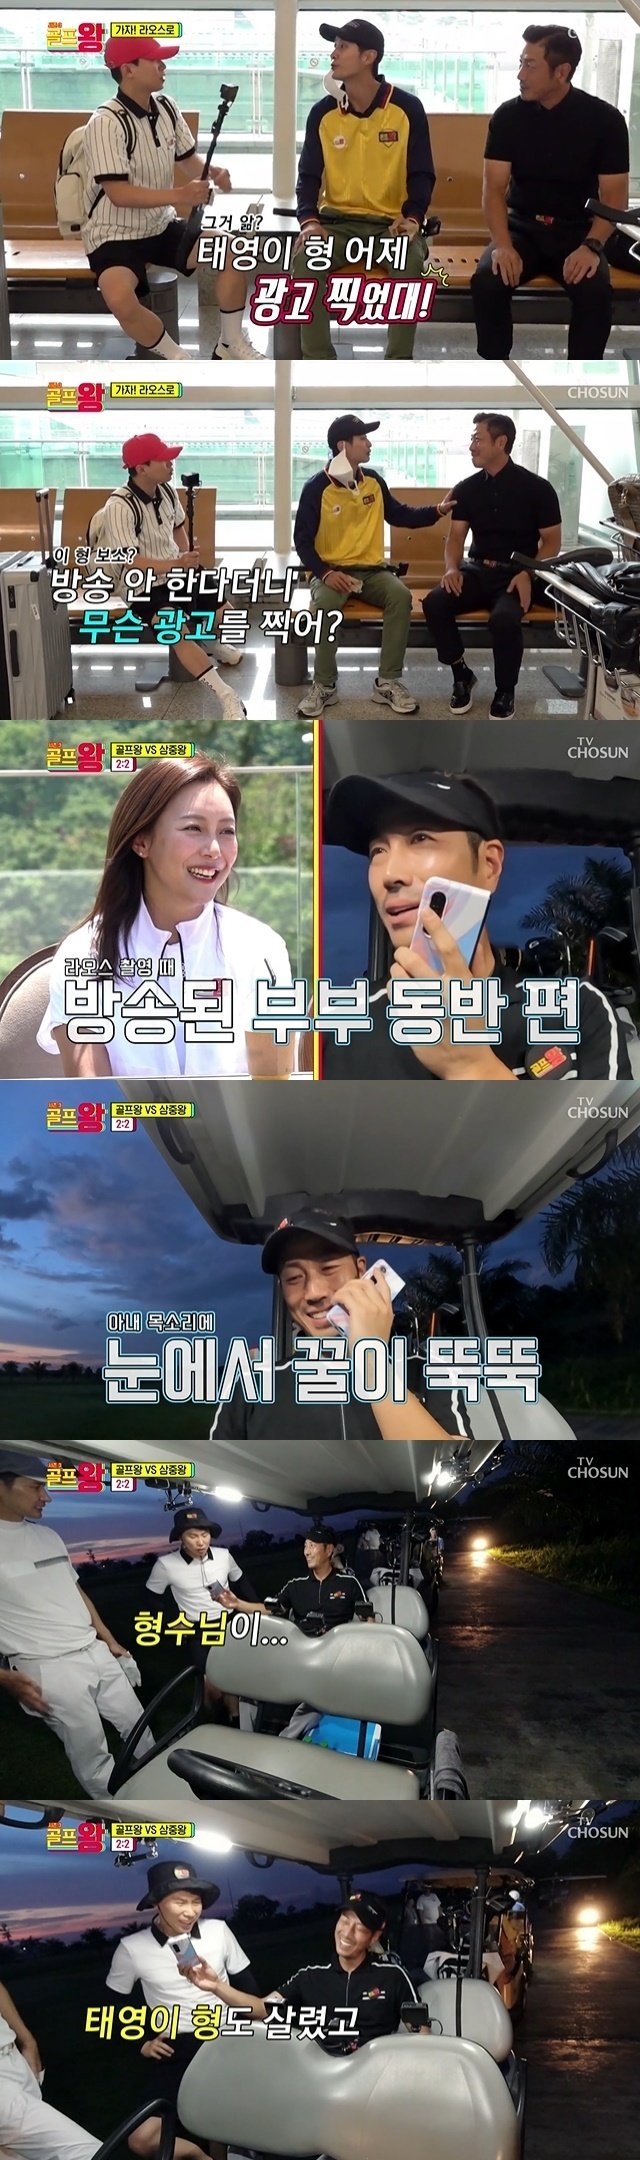 Yoon Tae-young boasted about the recent AD shoot.In the 13th episode of the TV Chosun entertainment Golf King 3 broadcasted on July 2, members who left for Laos for Golf were drawn.On this day, Yoon Tae-young boasted that he took AD a day before the recording day to the members gathered at the airport before leaving for Laos.He said Yang Se-hyeong did not broadcast and what AD did you take? And said, Golf brand clothing.Yang Se-hyeong said, In fact, the Winner is my brother; I was aiming for the Golfbok model (everyone) through season 3, but there was no one who was done; my brother was the first.Yoon Tae-young showed humility that thanks to you all. Yang Se-hyeong and Kim Ji-seok seemed to speak in advance and laughed with their hands, saying, What do you give me?Then Kim Ji-seok also said, In fact, I shot AD.Kim Ji-seok shrugged, saying, We are not kidding. He said, I will wait for more contact. He politely sent a love call to AD state and attracted attention.In Laos, Yoon called his wife, Im Yoo-jin, in a short time. He asked if Im Yoo-jin had taken care of his appearance on Golf King 3.I also think about that day and it is fun. I came out so well, my brother came out as a lover, he said, I am so good, I will see this 10 times.Yang Se-hyeong, who was listening to the couples phone conversation next to him, said, My brother-in-law saved Golf King 3, Taeyoung saved his brother and saved everyone.Kim Ji-seok called Yoon Tae-young a national lover saying, Tae Young is a full-time brother-in-law.Lim Yoo-jin, as well as Yoon Tae-young, Yang Se-hyeong and Kim Ji-seok, cheered, Everyone please, have a good one. Fight. Yes Yes, yes.Yang Se-hyeong advised Yoon Tae-young to tell me I love you when the phone was showing signs of being disconnected, but before Yoon Tae-young executed, the phone was already disconnected.